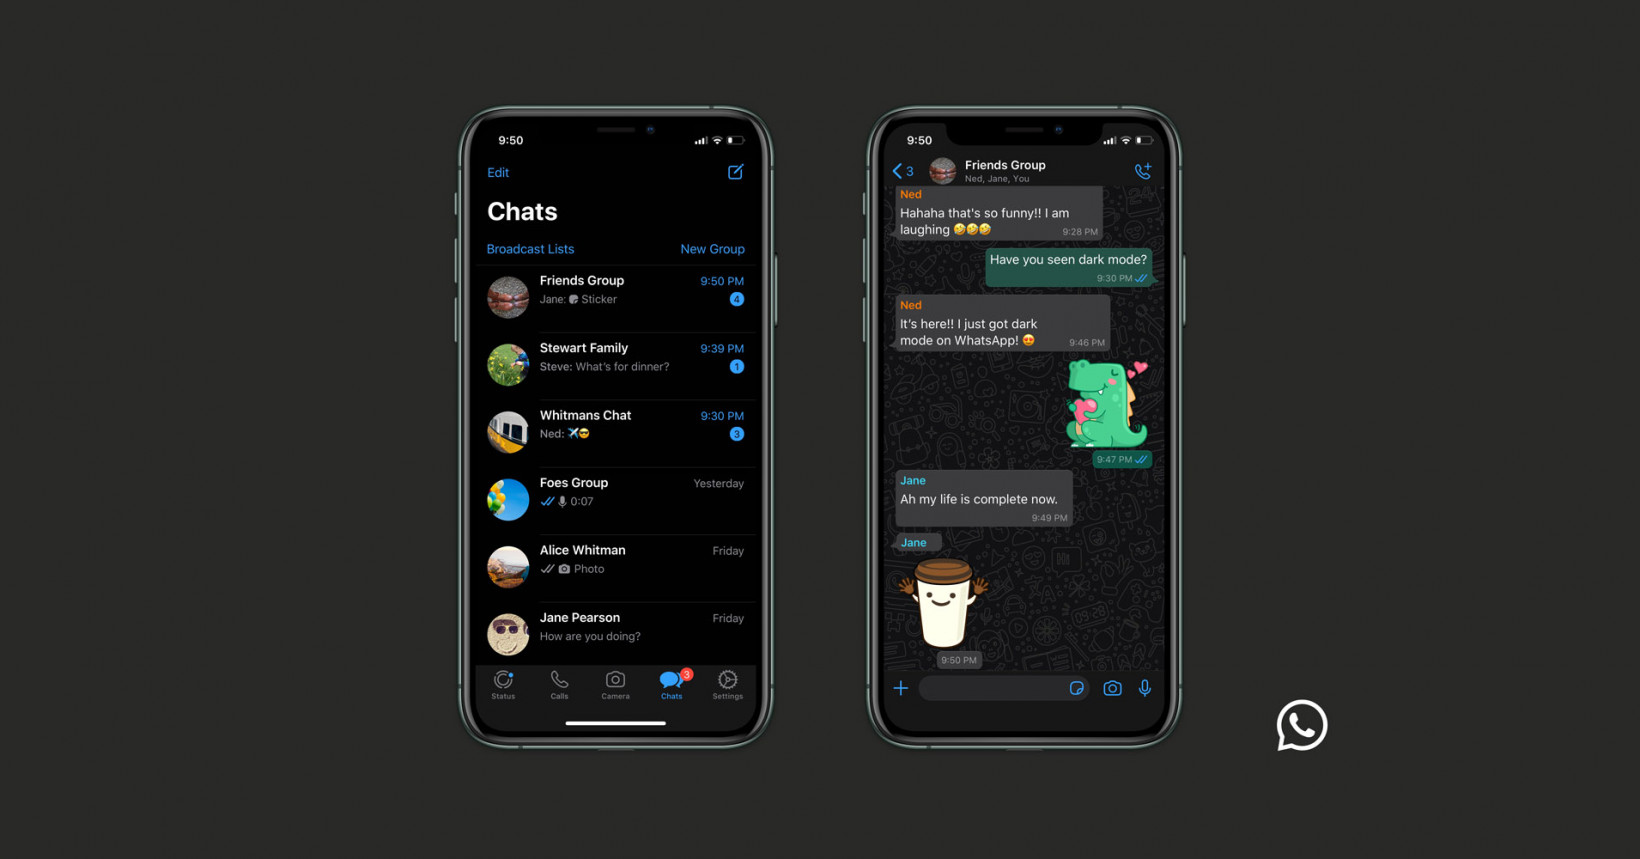 It's official: WhatsApp is rolling out Dark Mode to all users